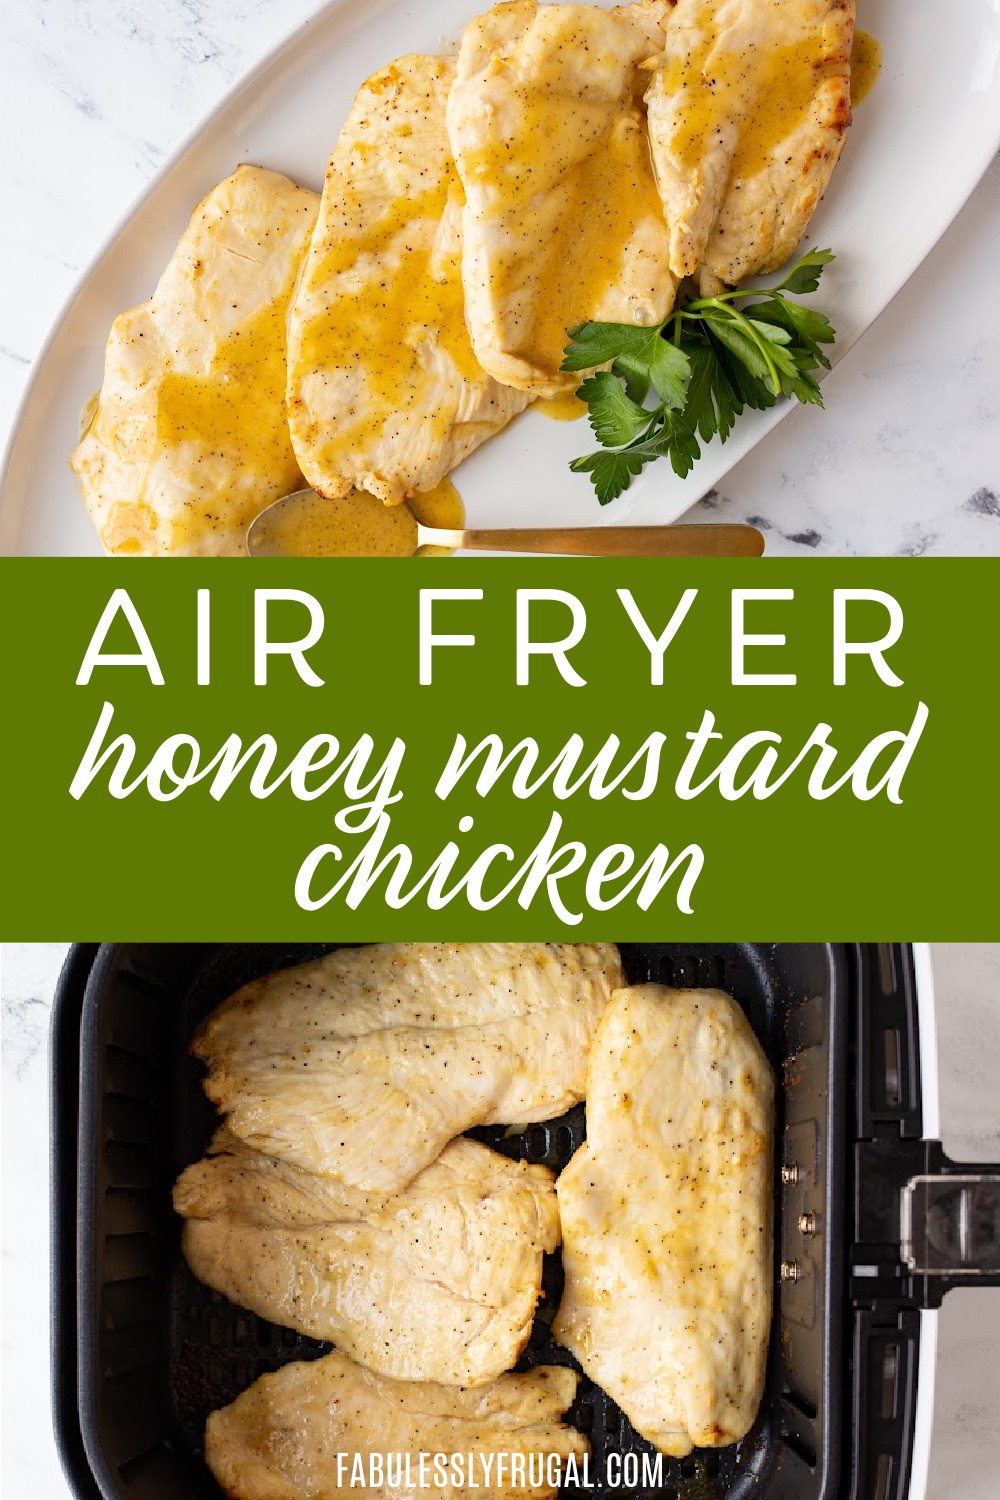 https://fabulesslyfrugal.com/wp-content/uploads/2022/01/how-to-make-honey-mustard-chicken-in-the-air-fryer-2.png